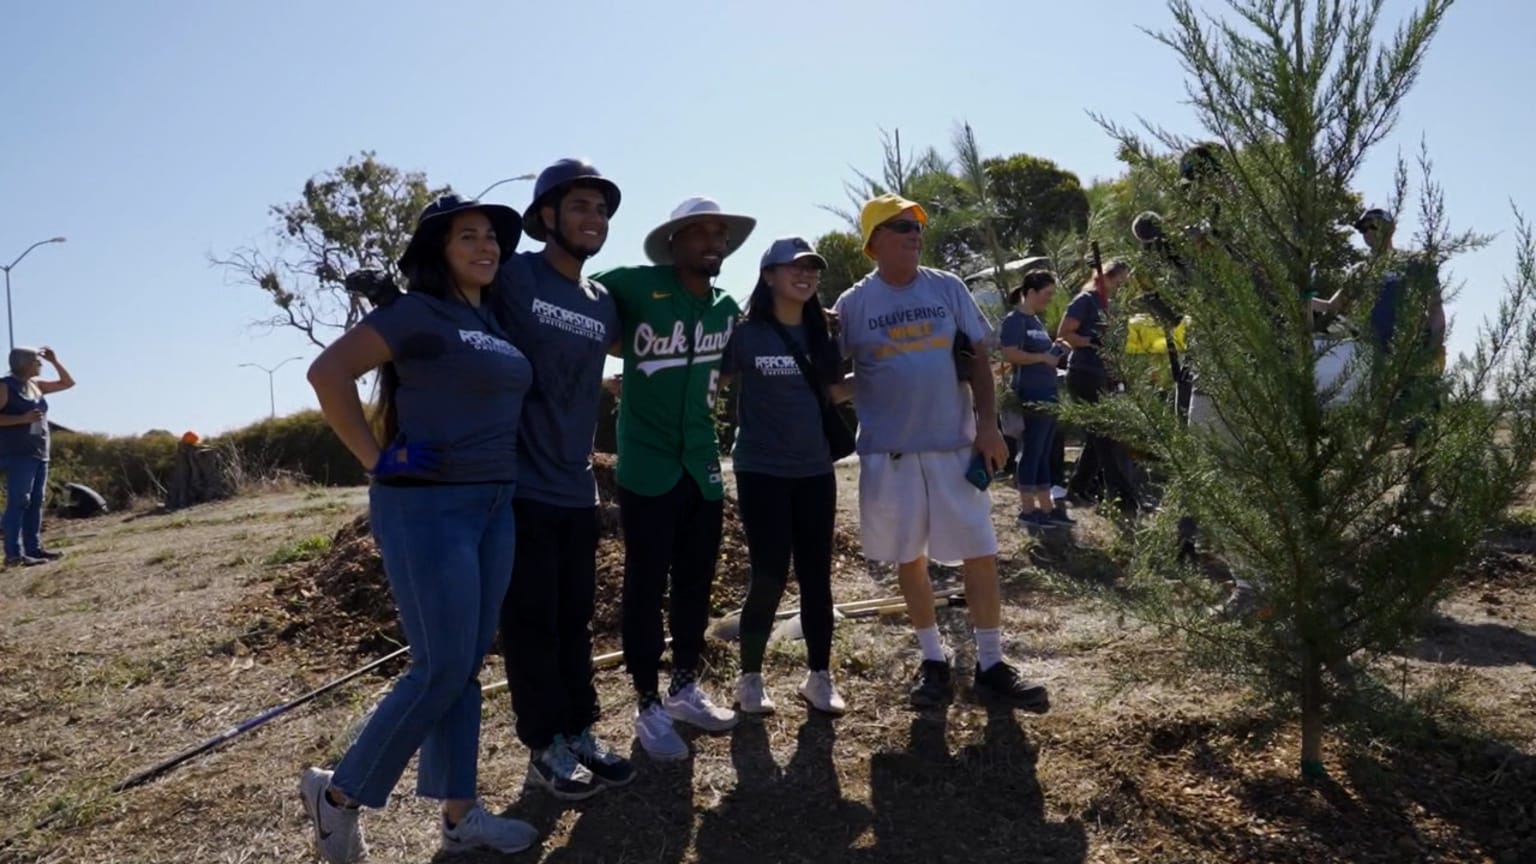 Oakland A's star Tony Kemp tells us why he's planting trees, messaging with  fans - Local News Matters